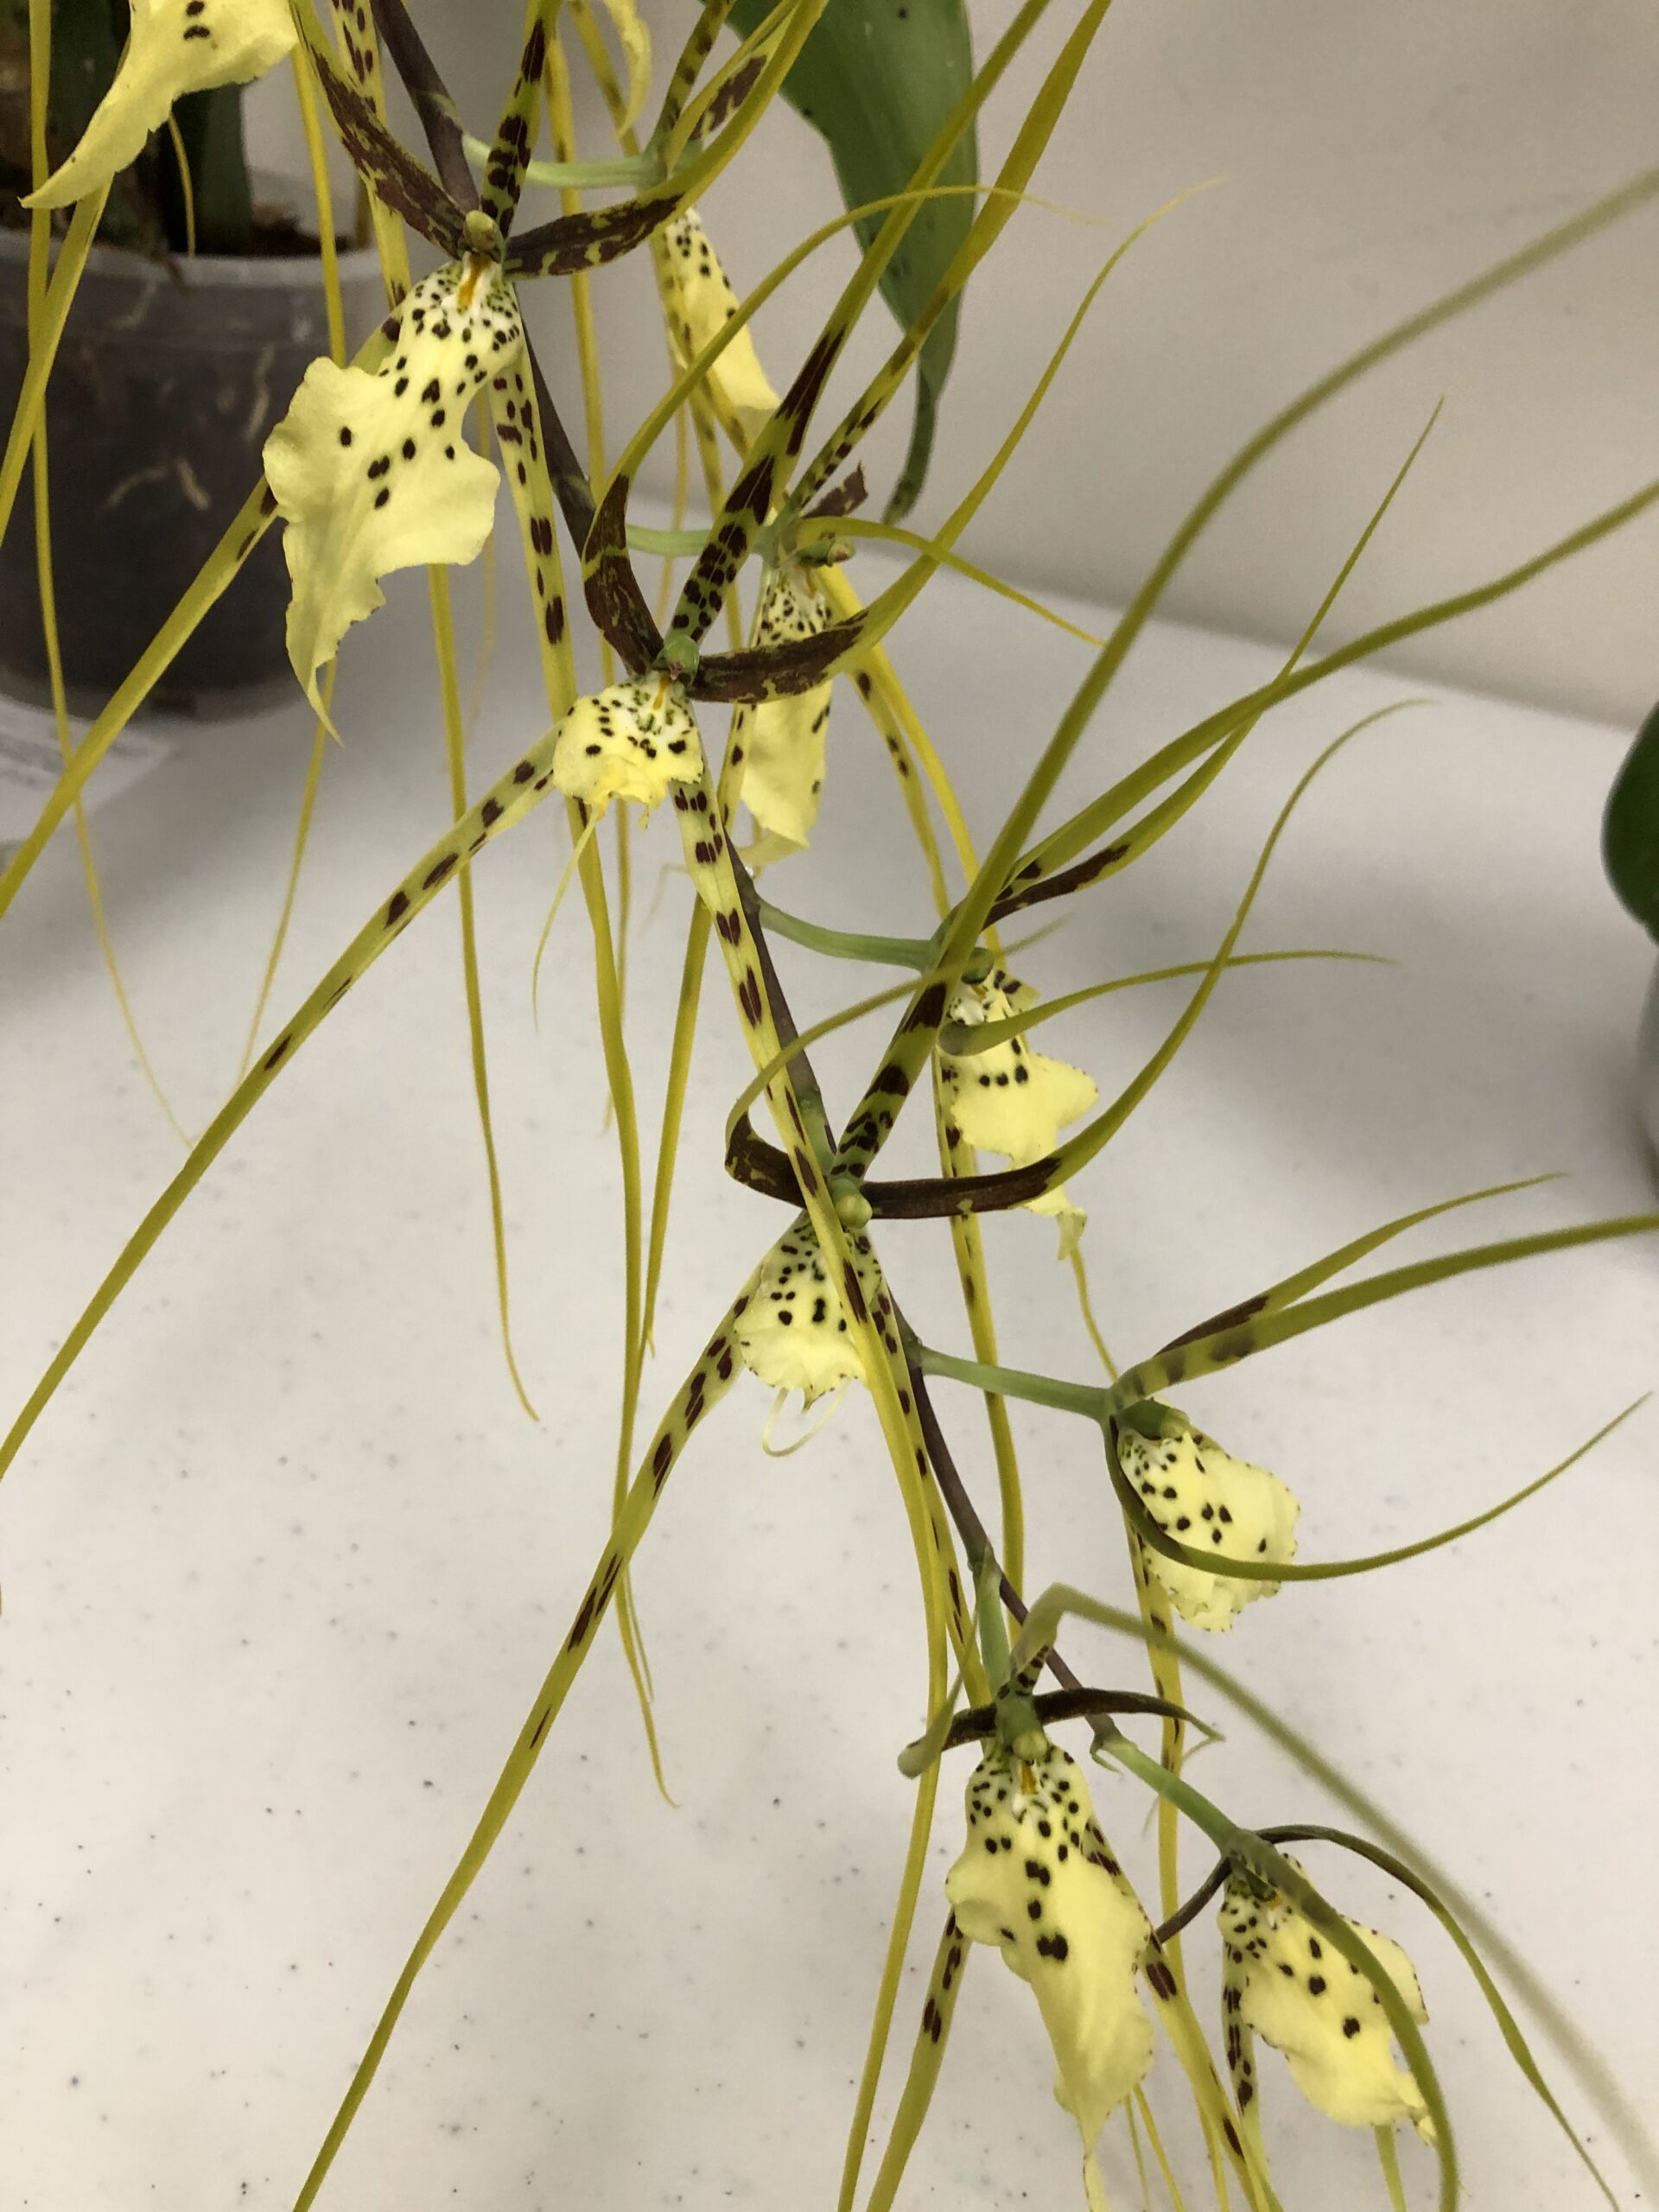 Brassia no name. A single inflorescence with over eight large spidery flowers. The lip is a light yellow with dark spots. The petals and sepals are long and skinny. They are a mid green with dark brown spots.